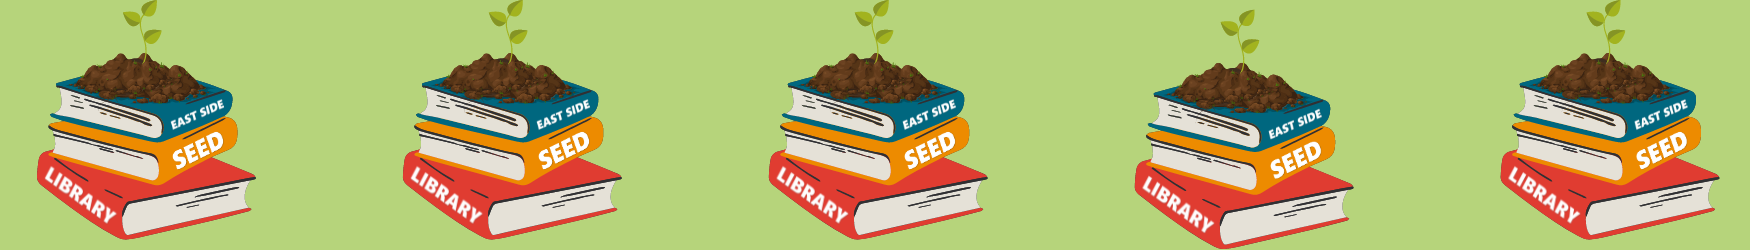 Seed Library Open House – April 20th!